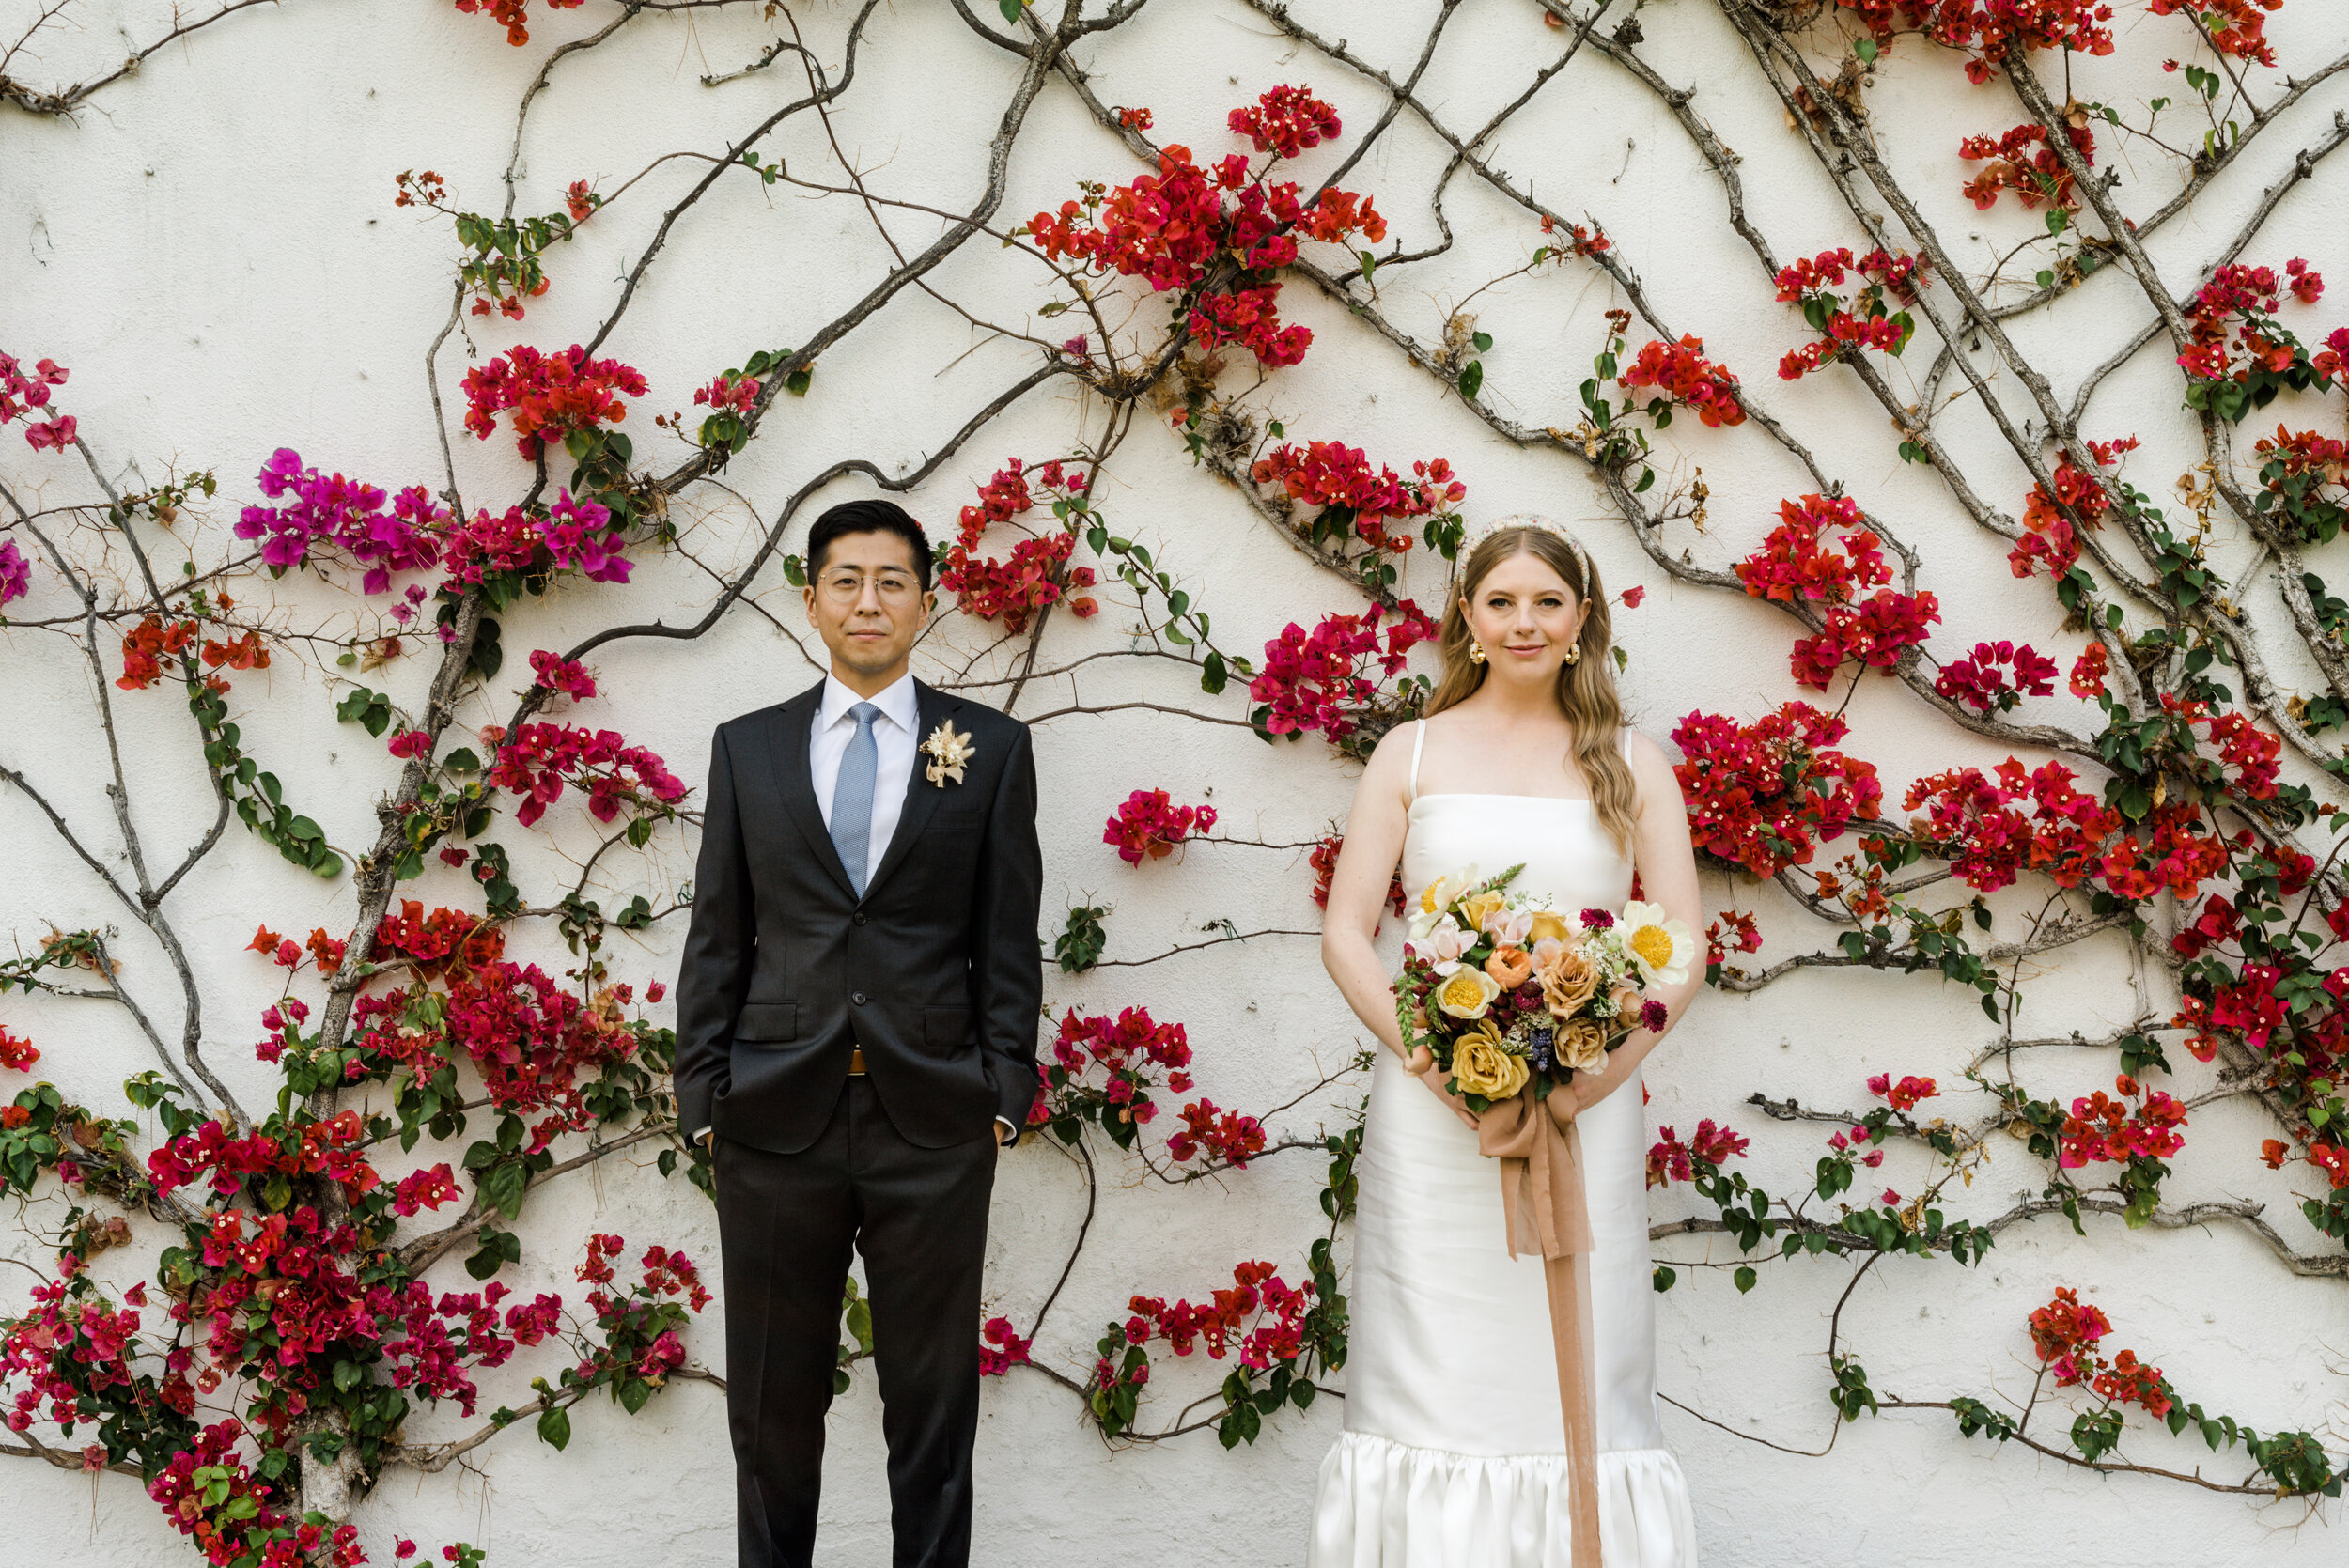 A bright and sunny Hollywood wedding